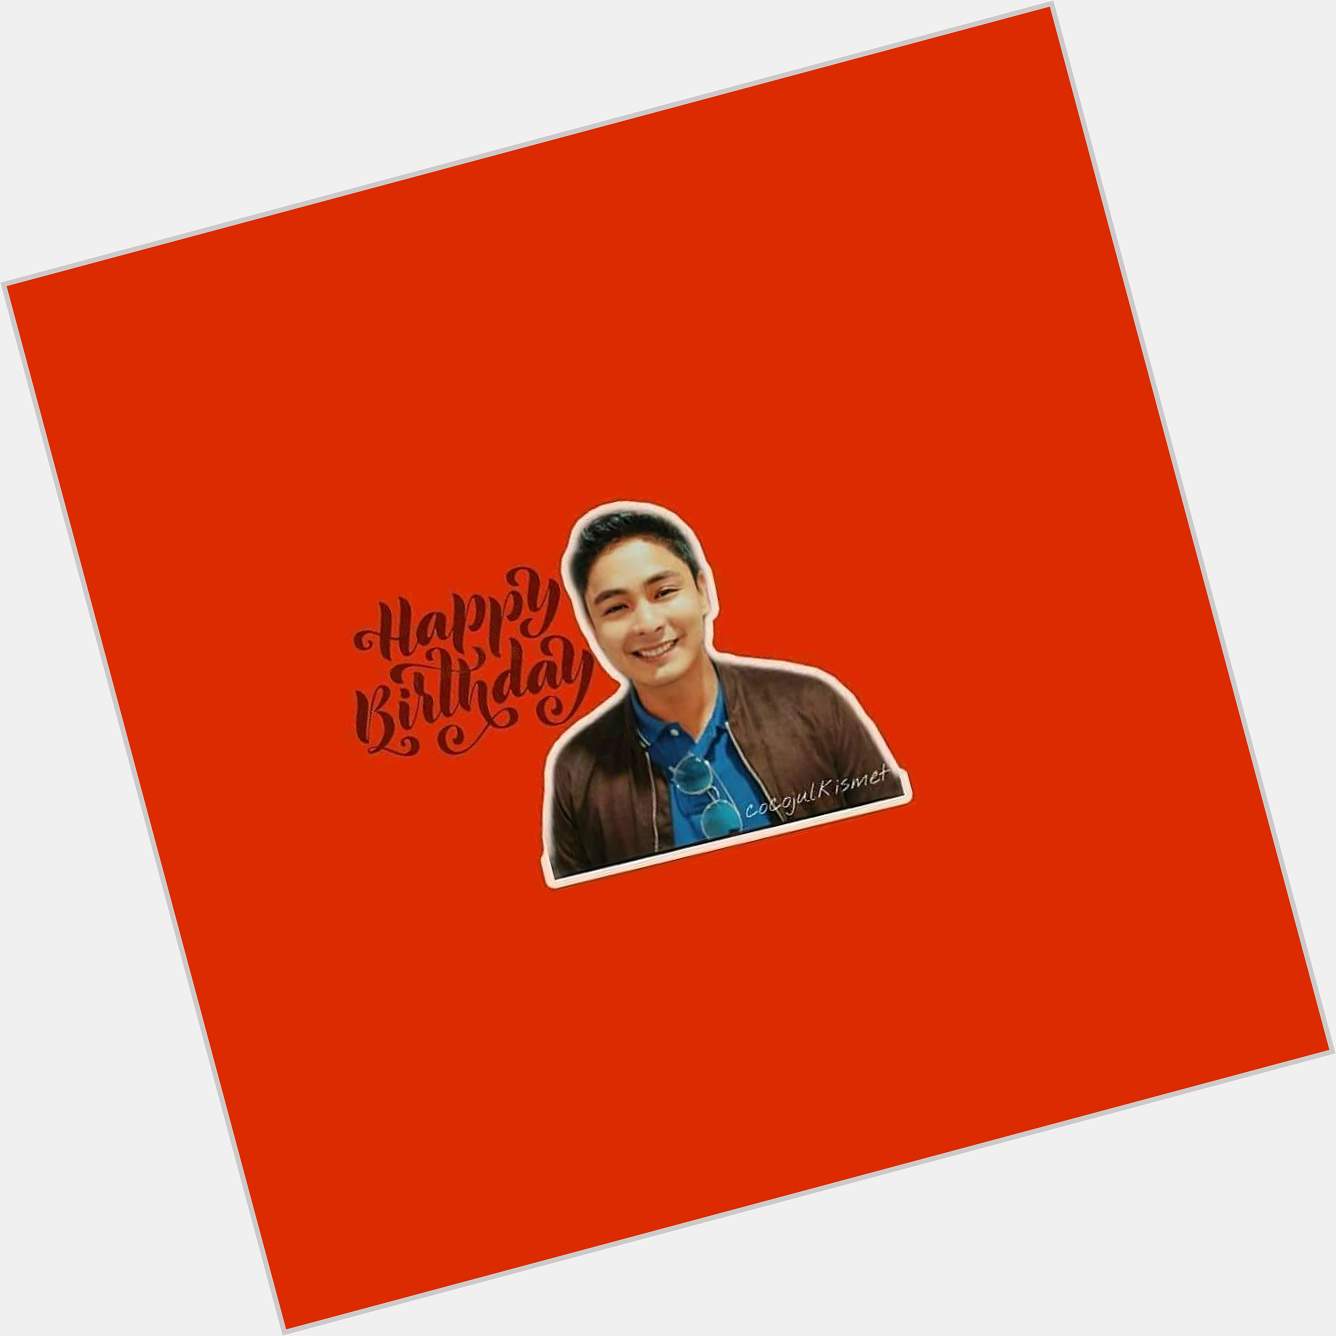 Happy Birthday Coco Martin    Use this message icons for Coco\s Big Day (c) 